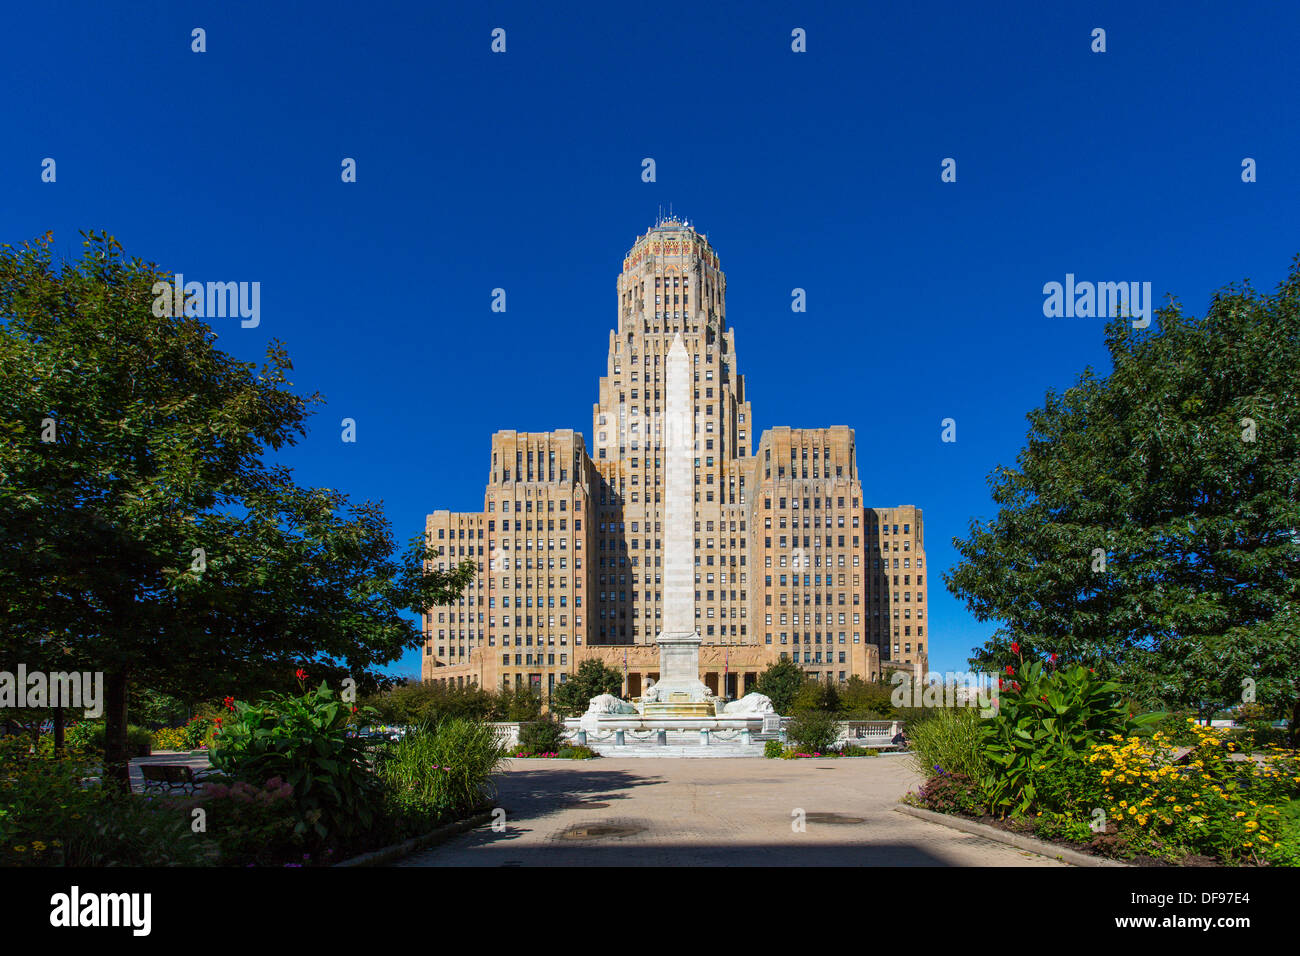 Art Deco style City Hall building completed in 1931 by Dietel, Wade & Jones on Niagara Square in Buffalo New York Stock Photo